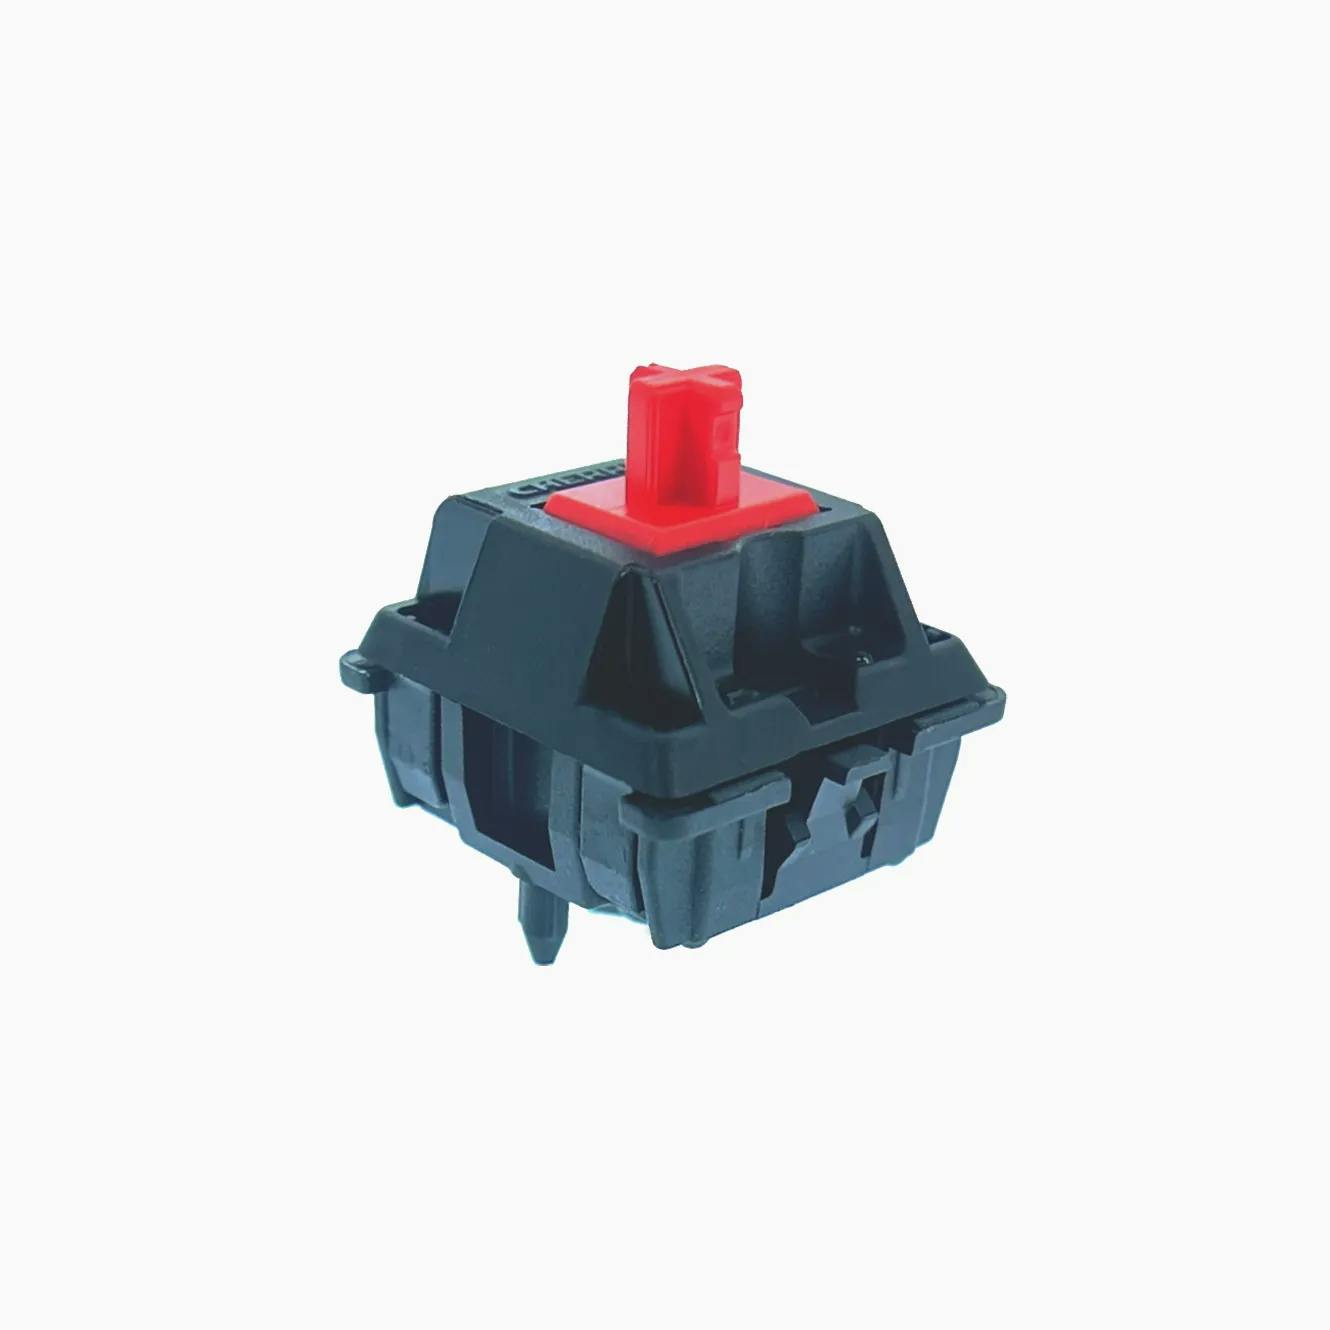 Image for Cherry MX Red Hyperglide Linear Switch